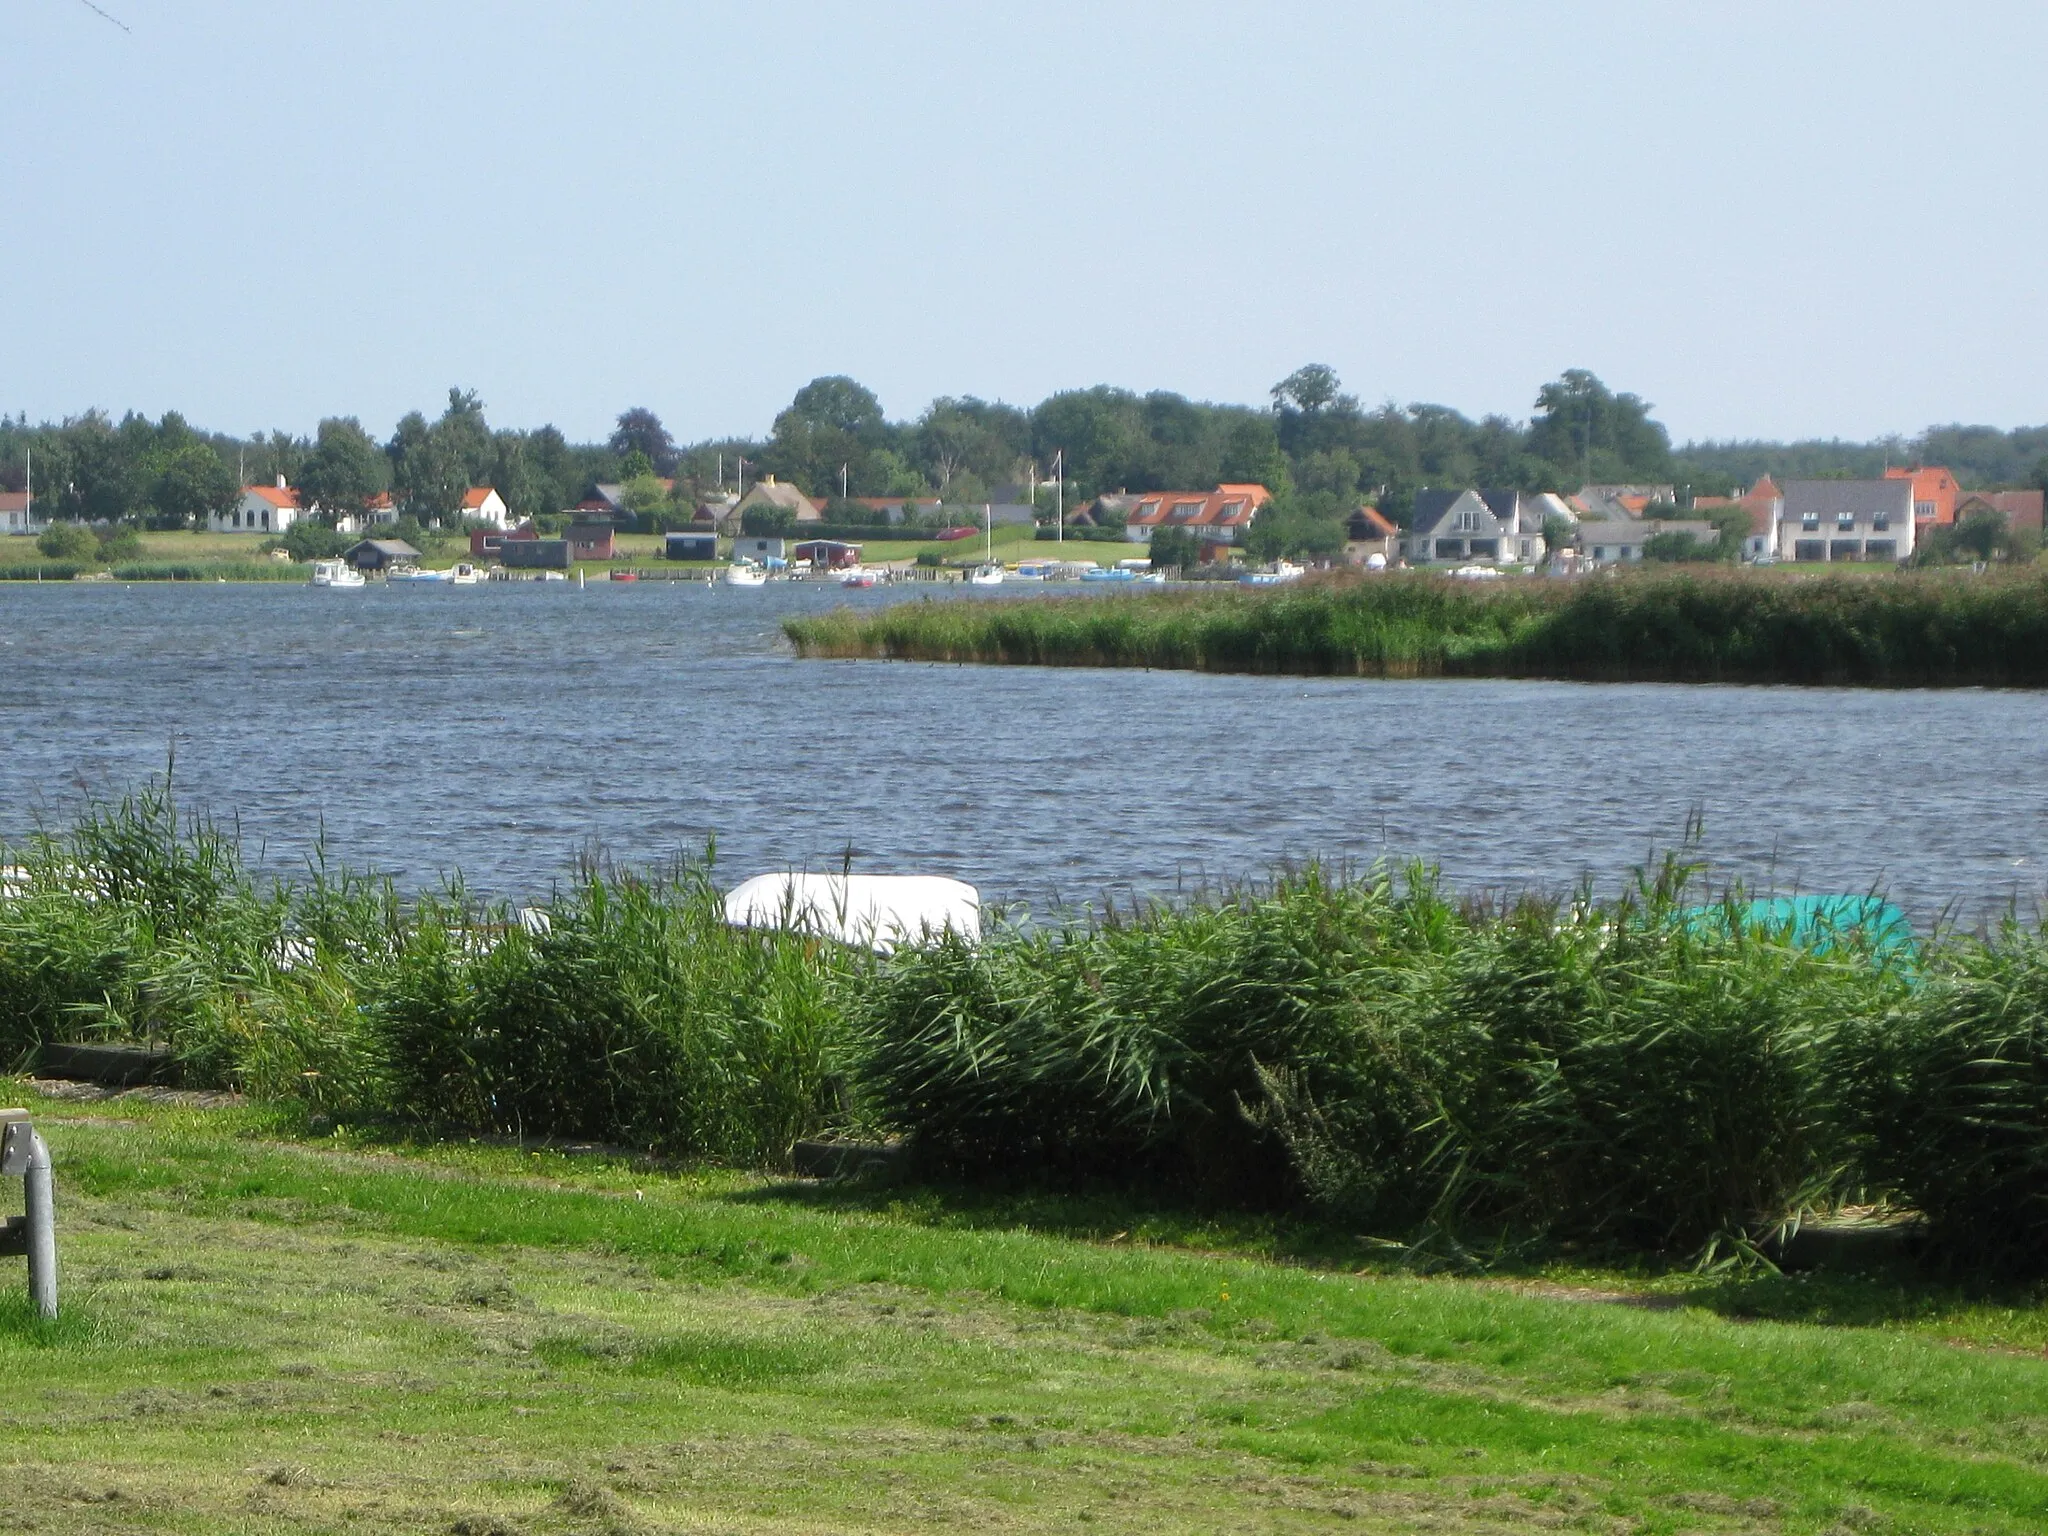 Photo showing: The eastern township (nearby "Næbskoven") of the small town "Præstø". The town is located on South Zealand in east Denmark.